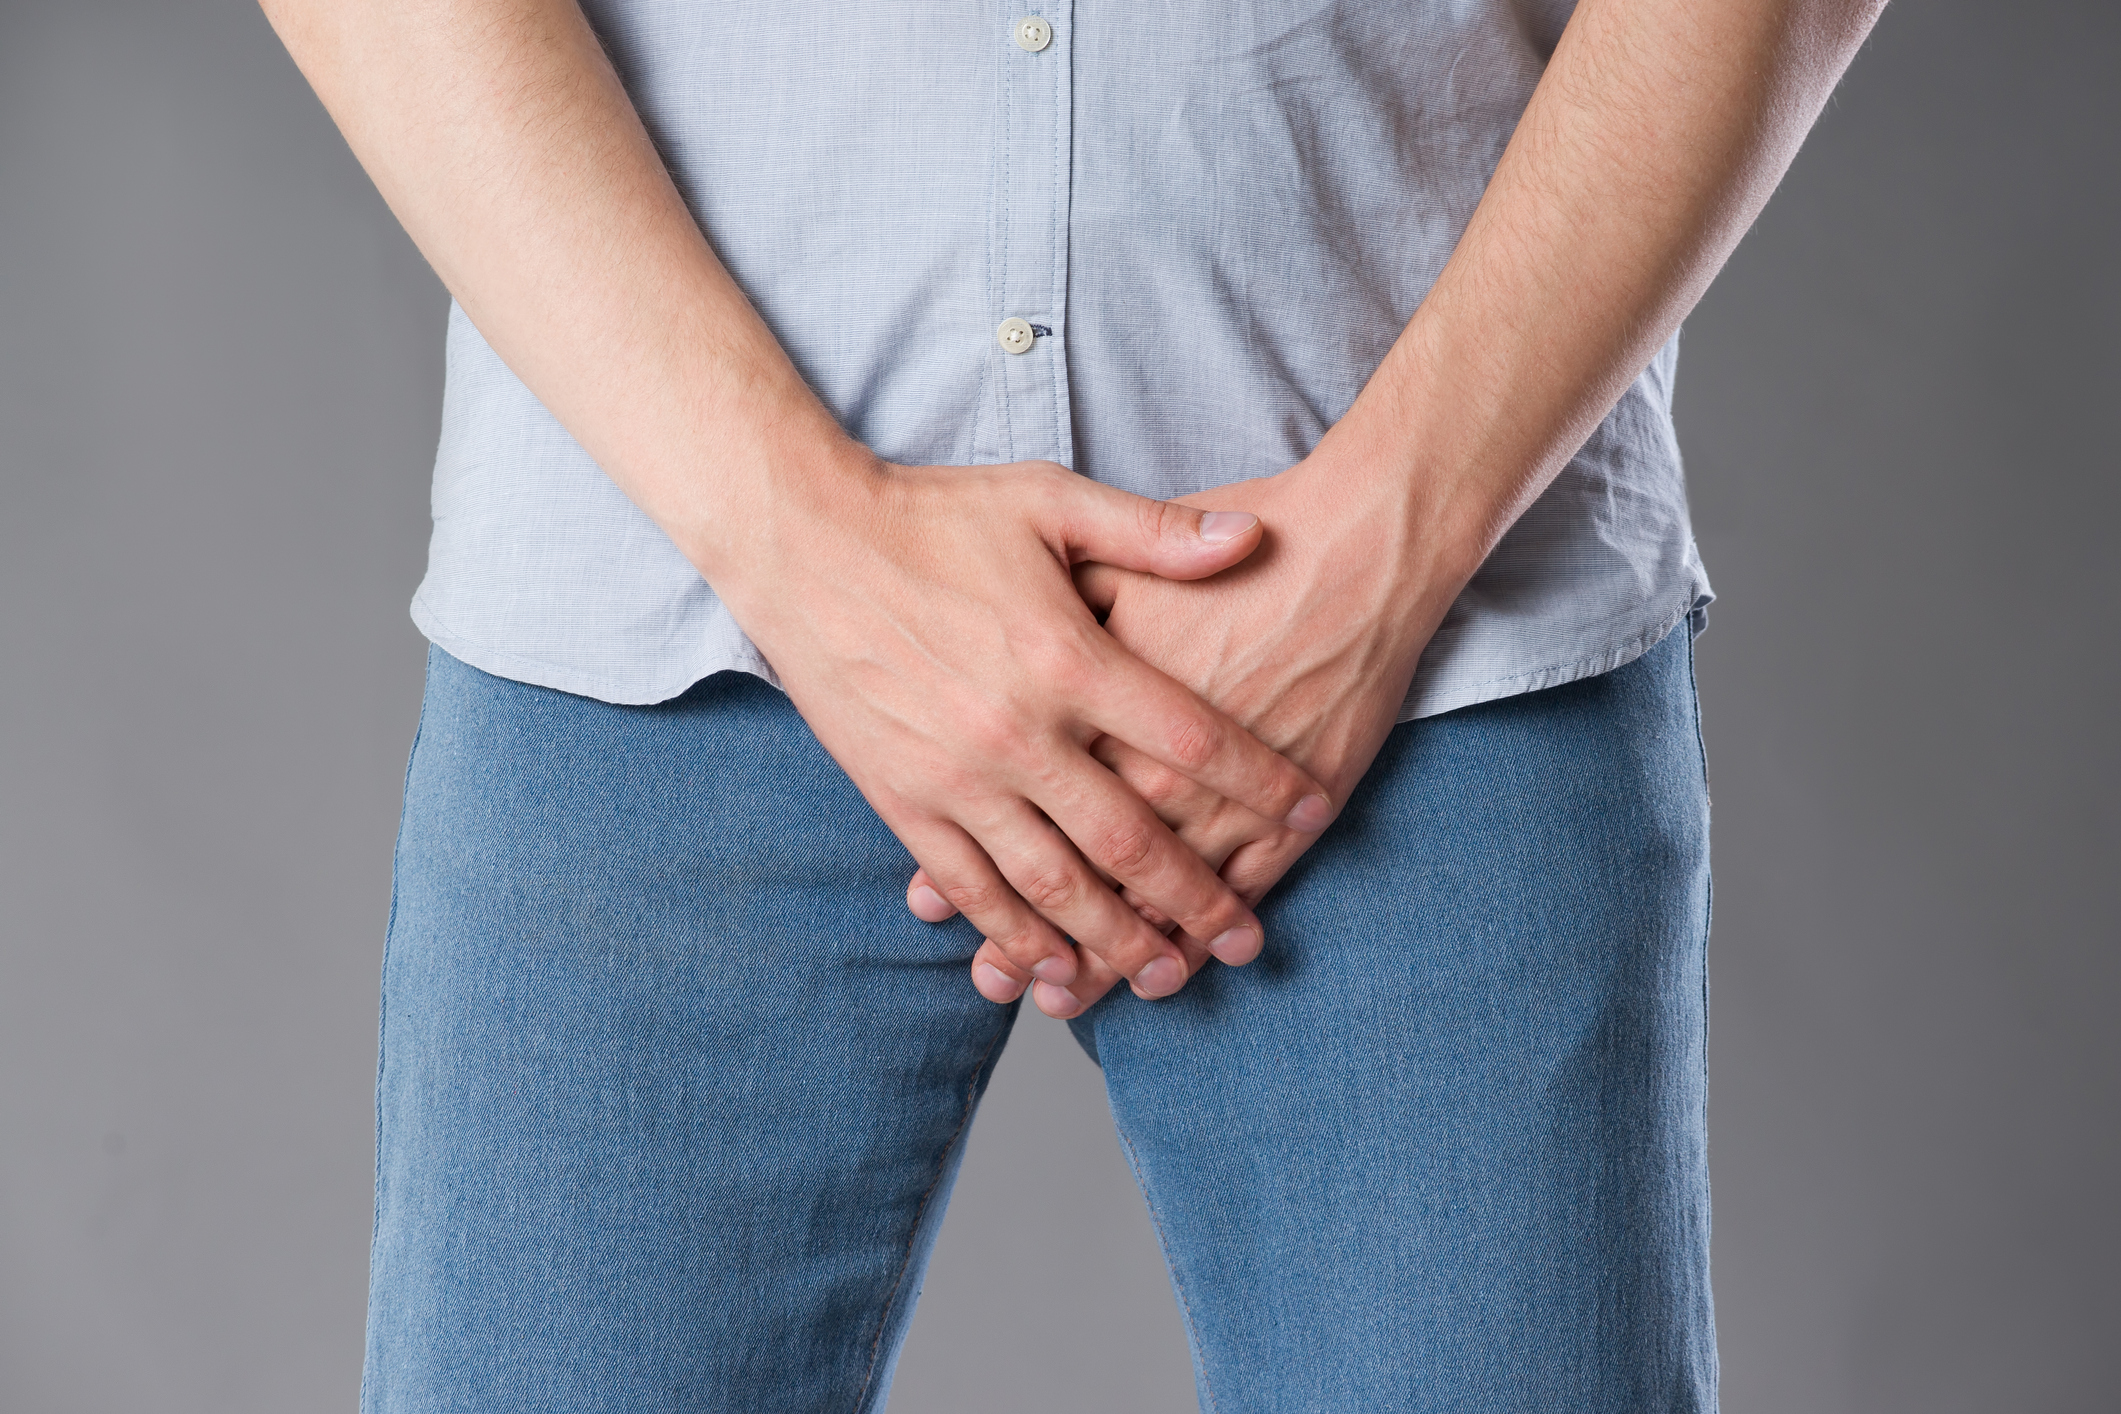 Pain in prostate, man suffering from prostatitis or from a venereal disease